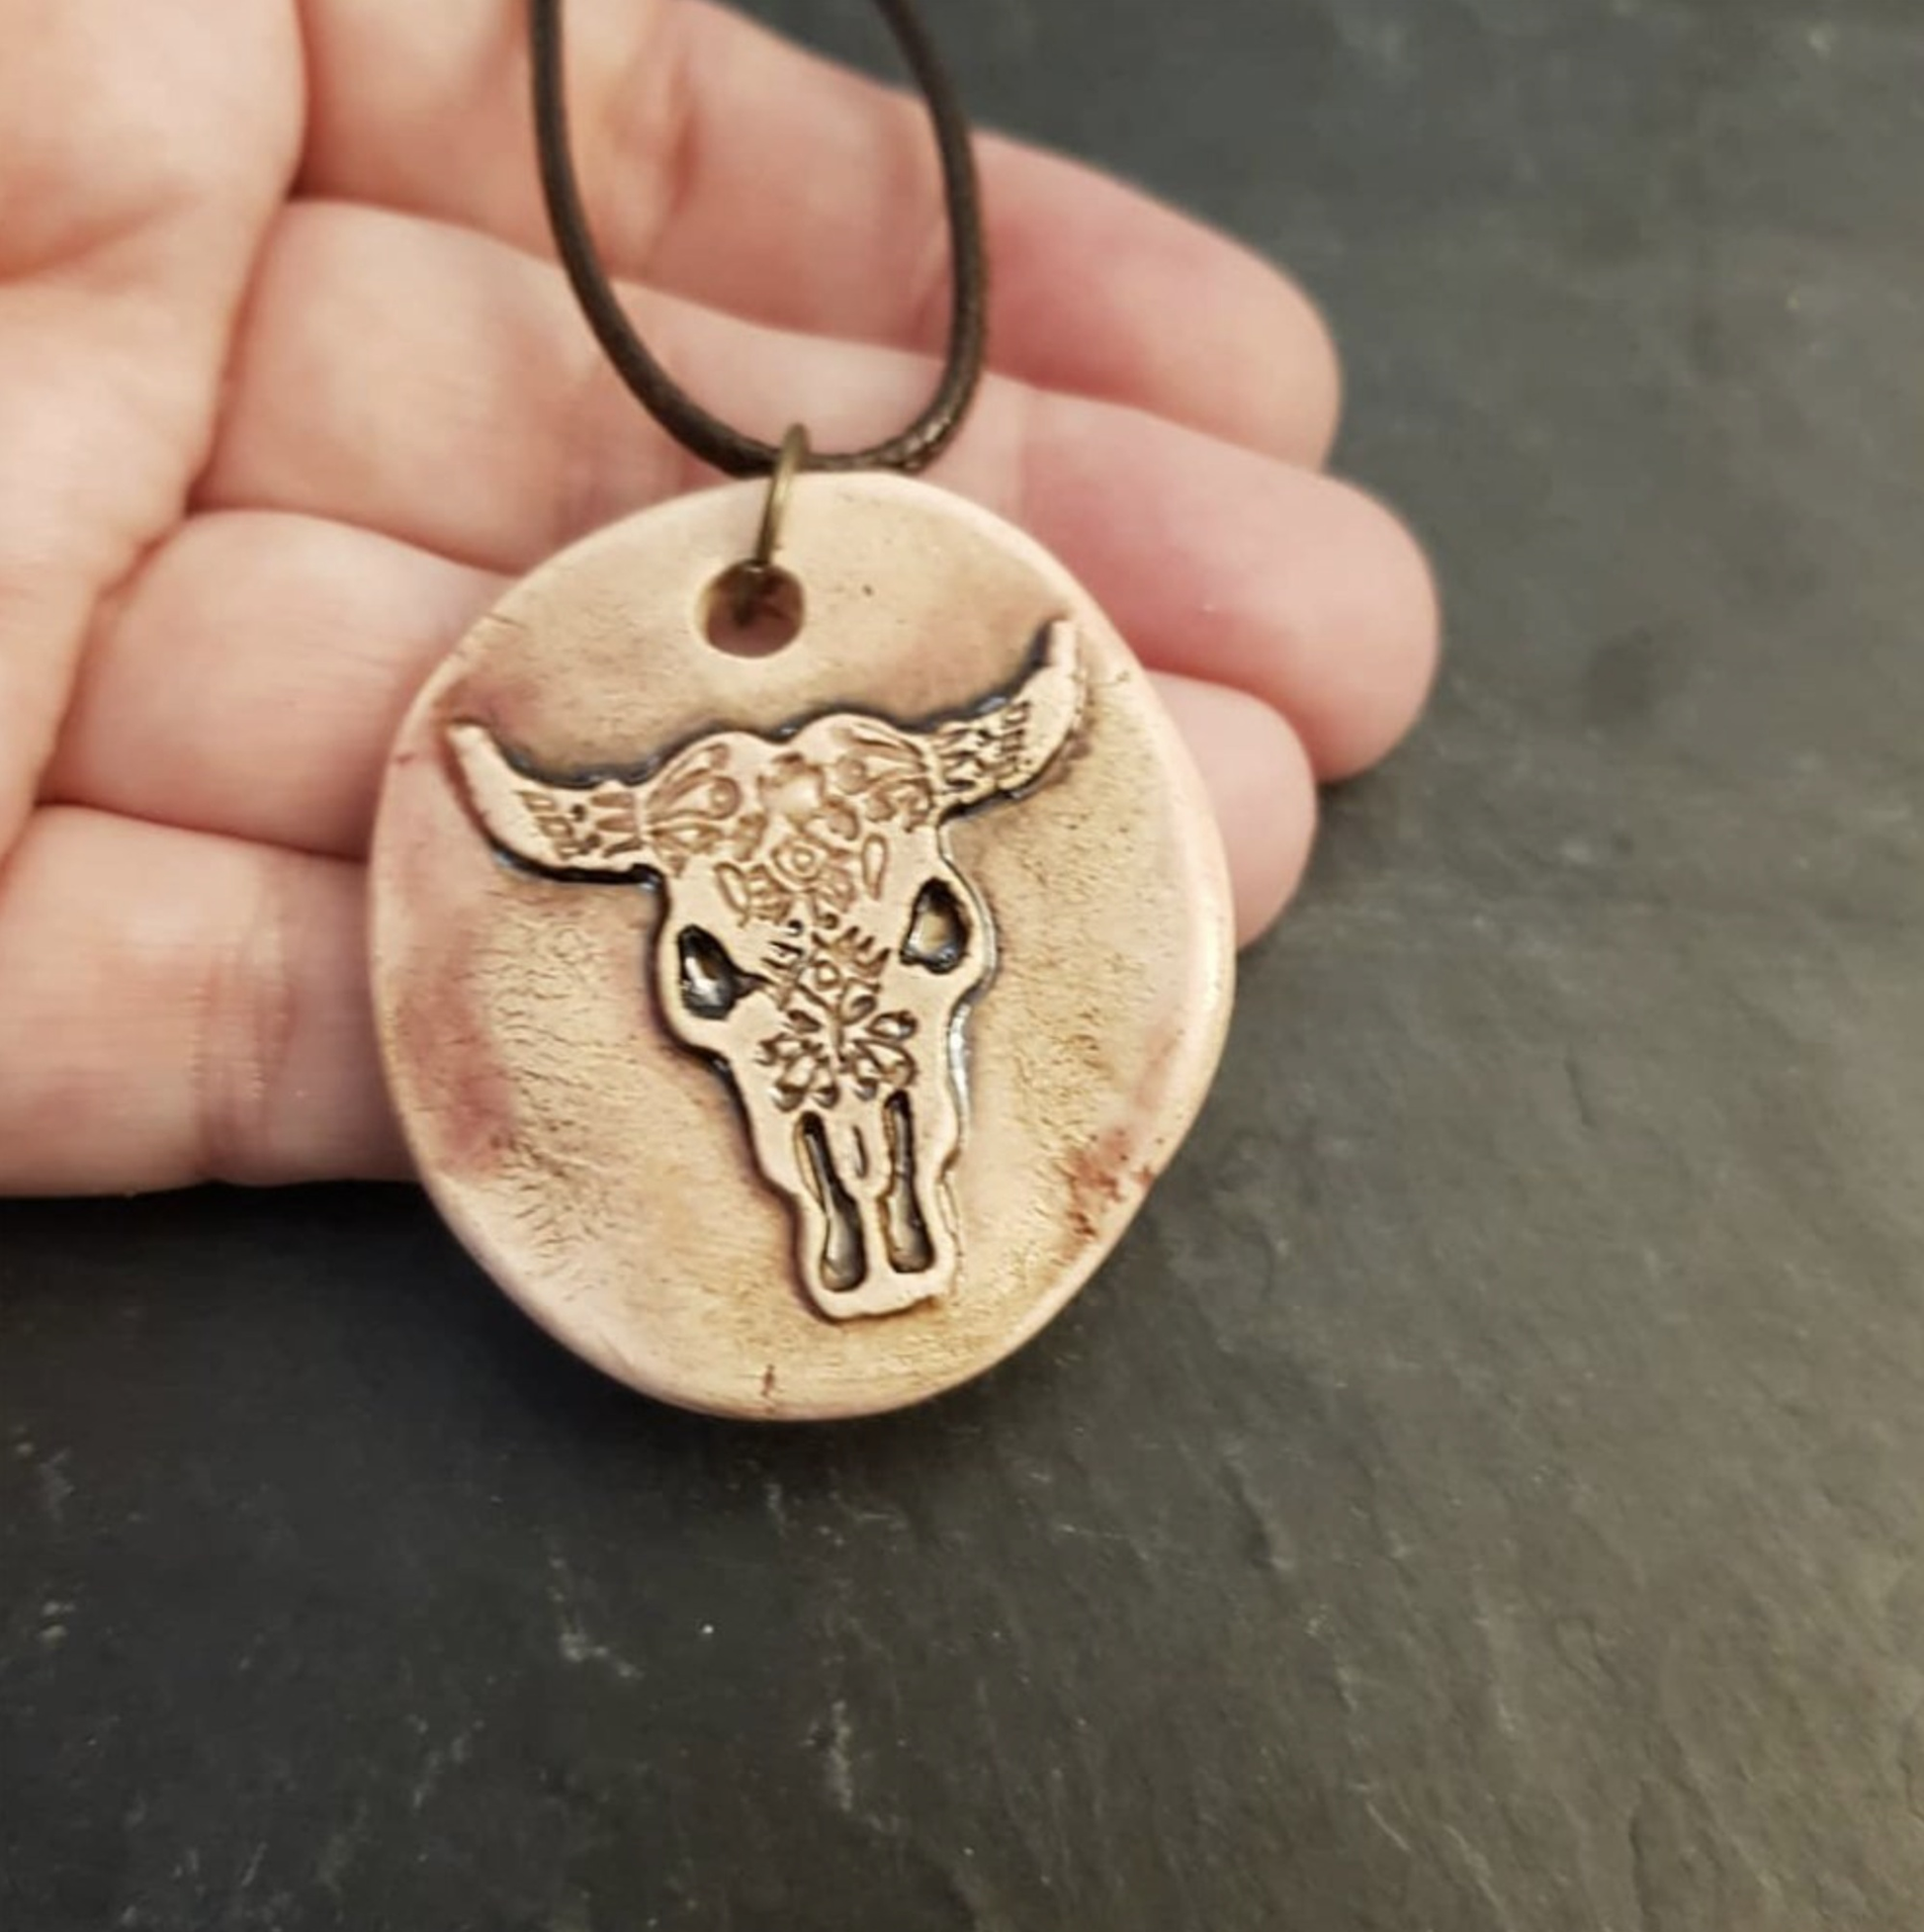 "Capture the Spirit of the Wild West with our Cow Skull Necklace."